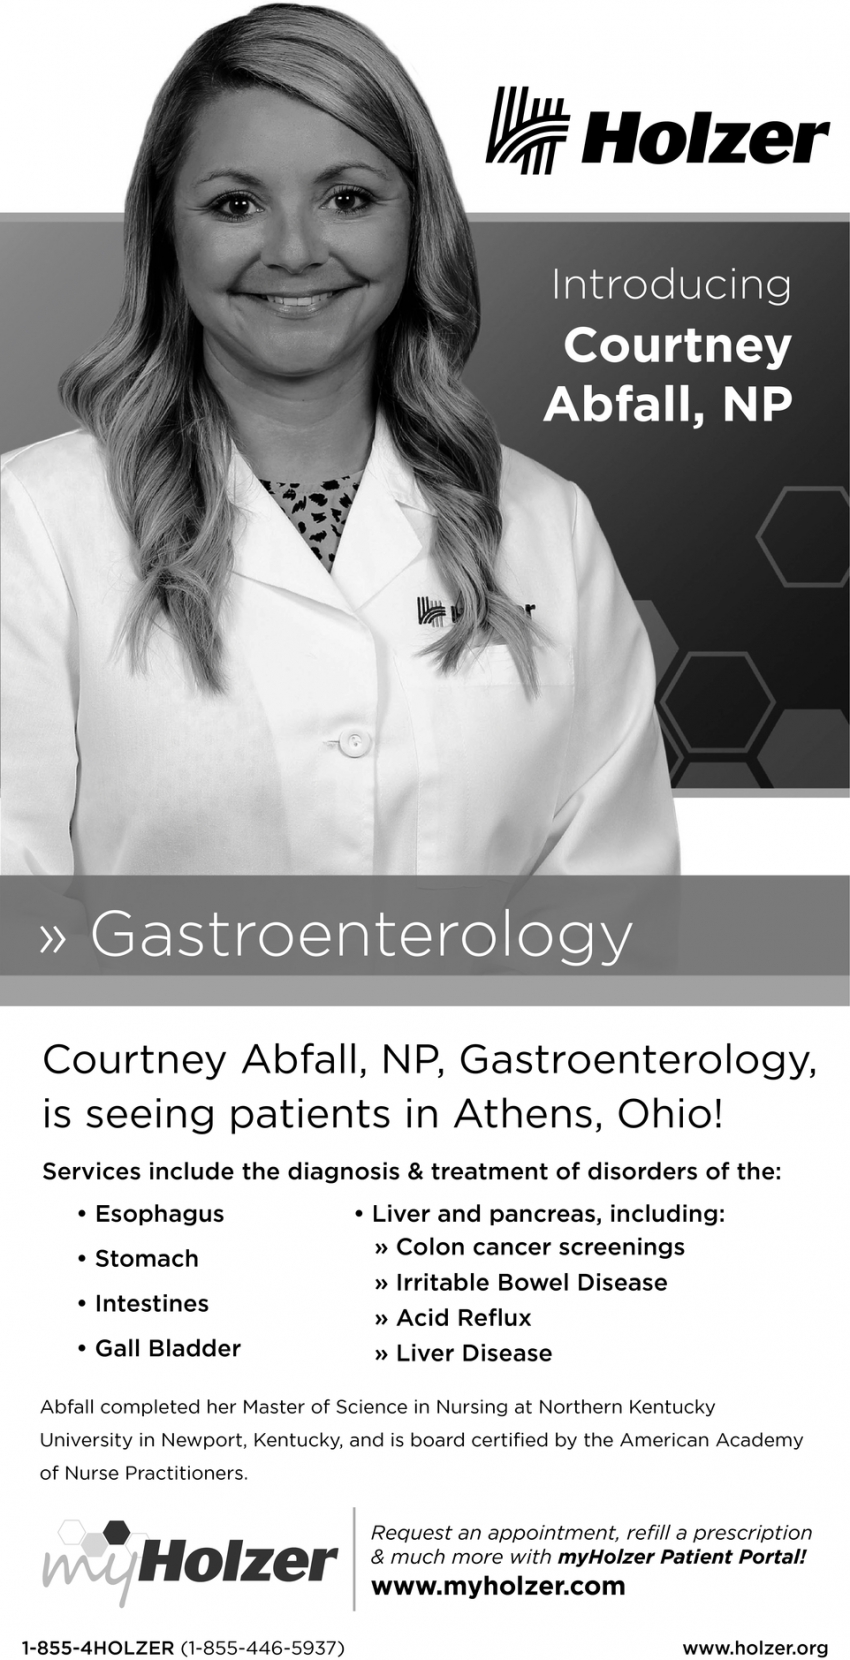 Introducing Courtney Abfall, NP